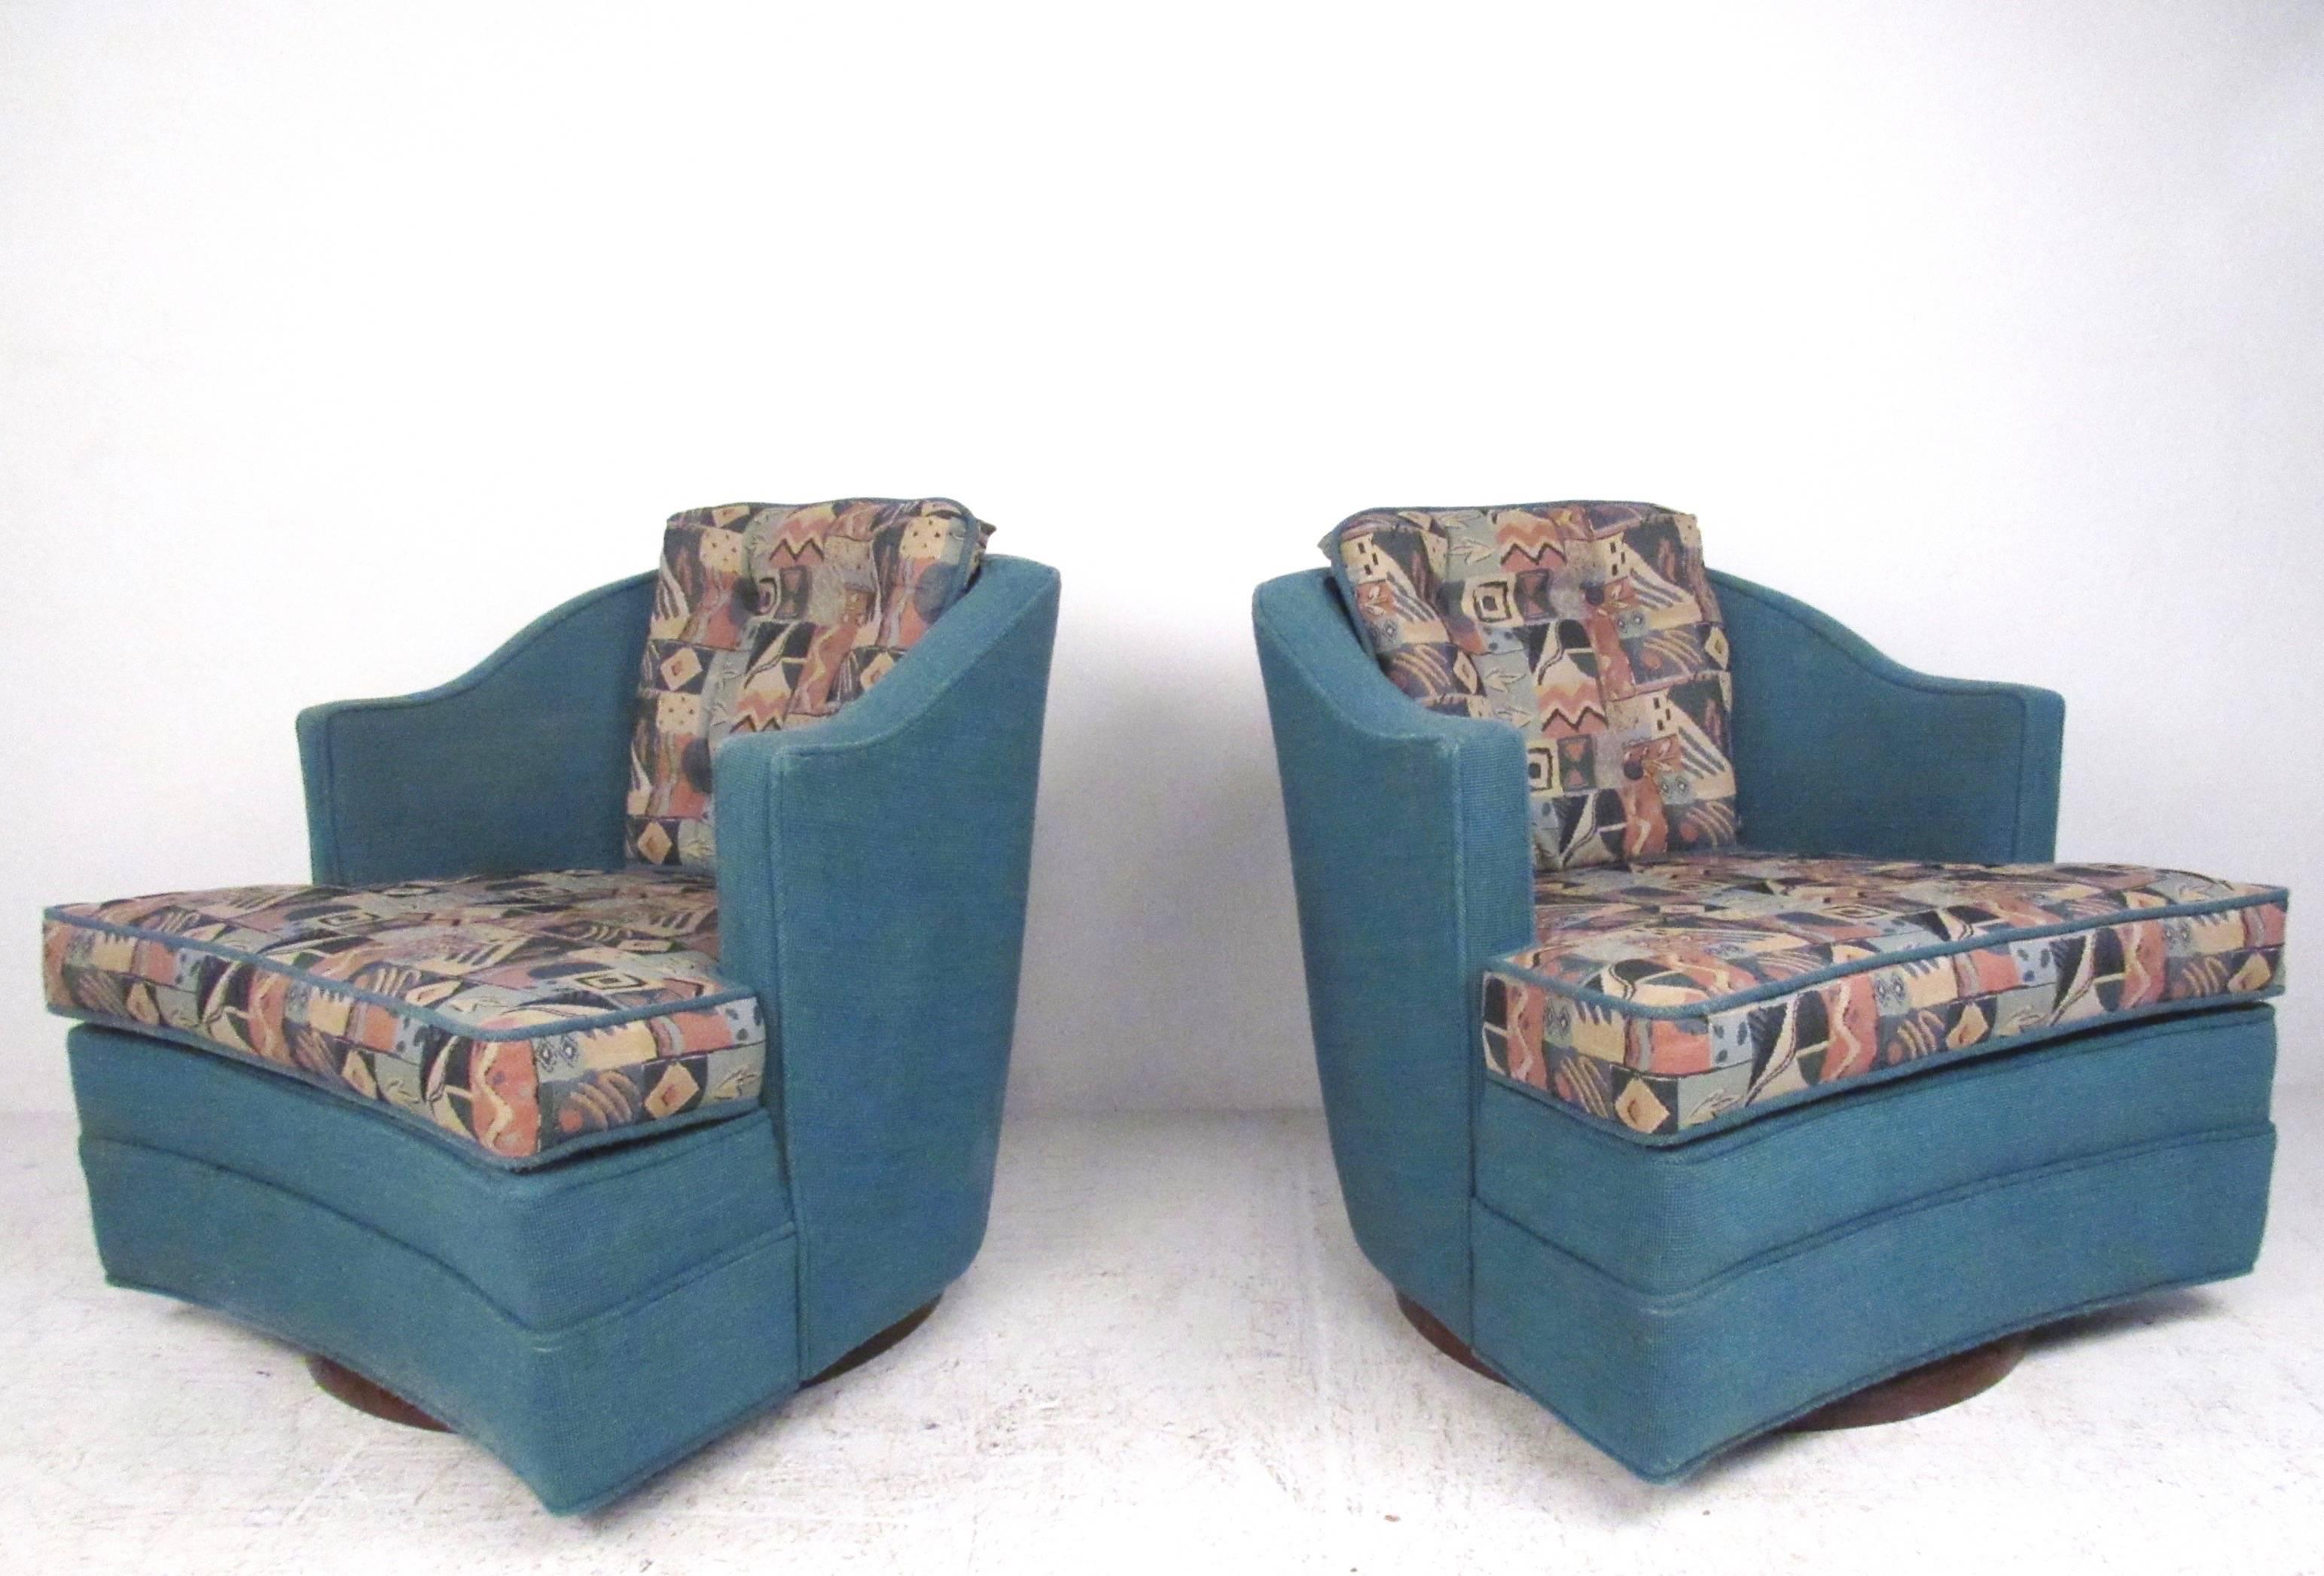 This unique pair of Mid-Century swivel chairs feature two tone vintage fabric and hardwood swivel bases. Comfortable rounded seat backs with tufted upholstery and sculpted arms add to the stylish appeal of this matching pair of club chairs, please